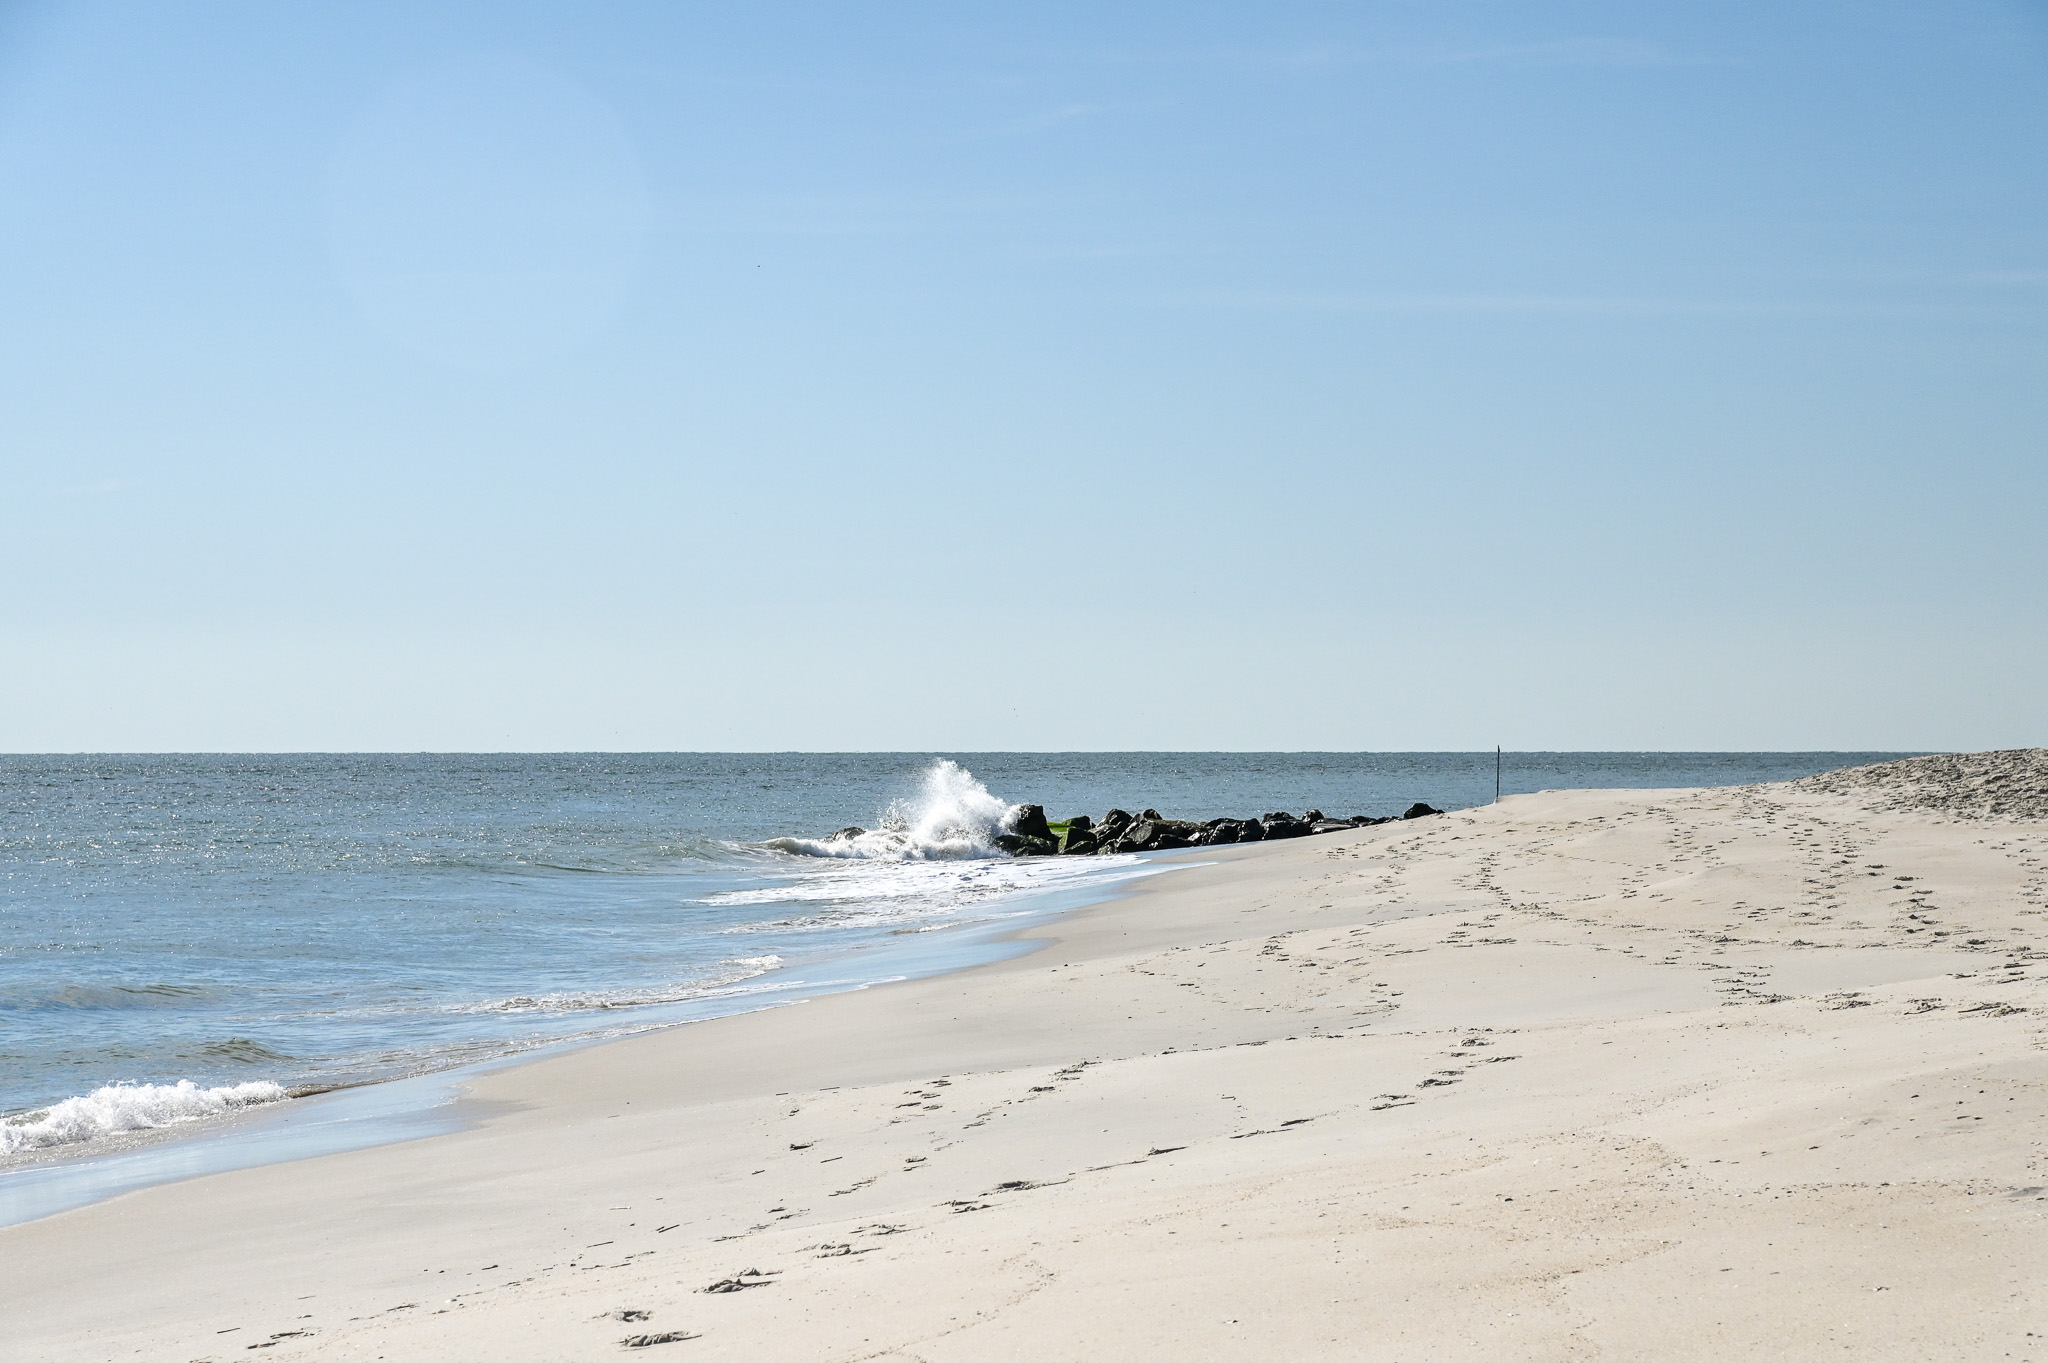 November Waves on the beach in Cape May